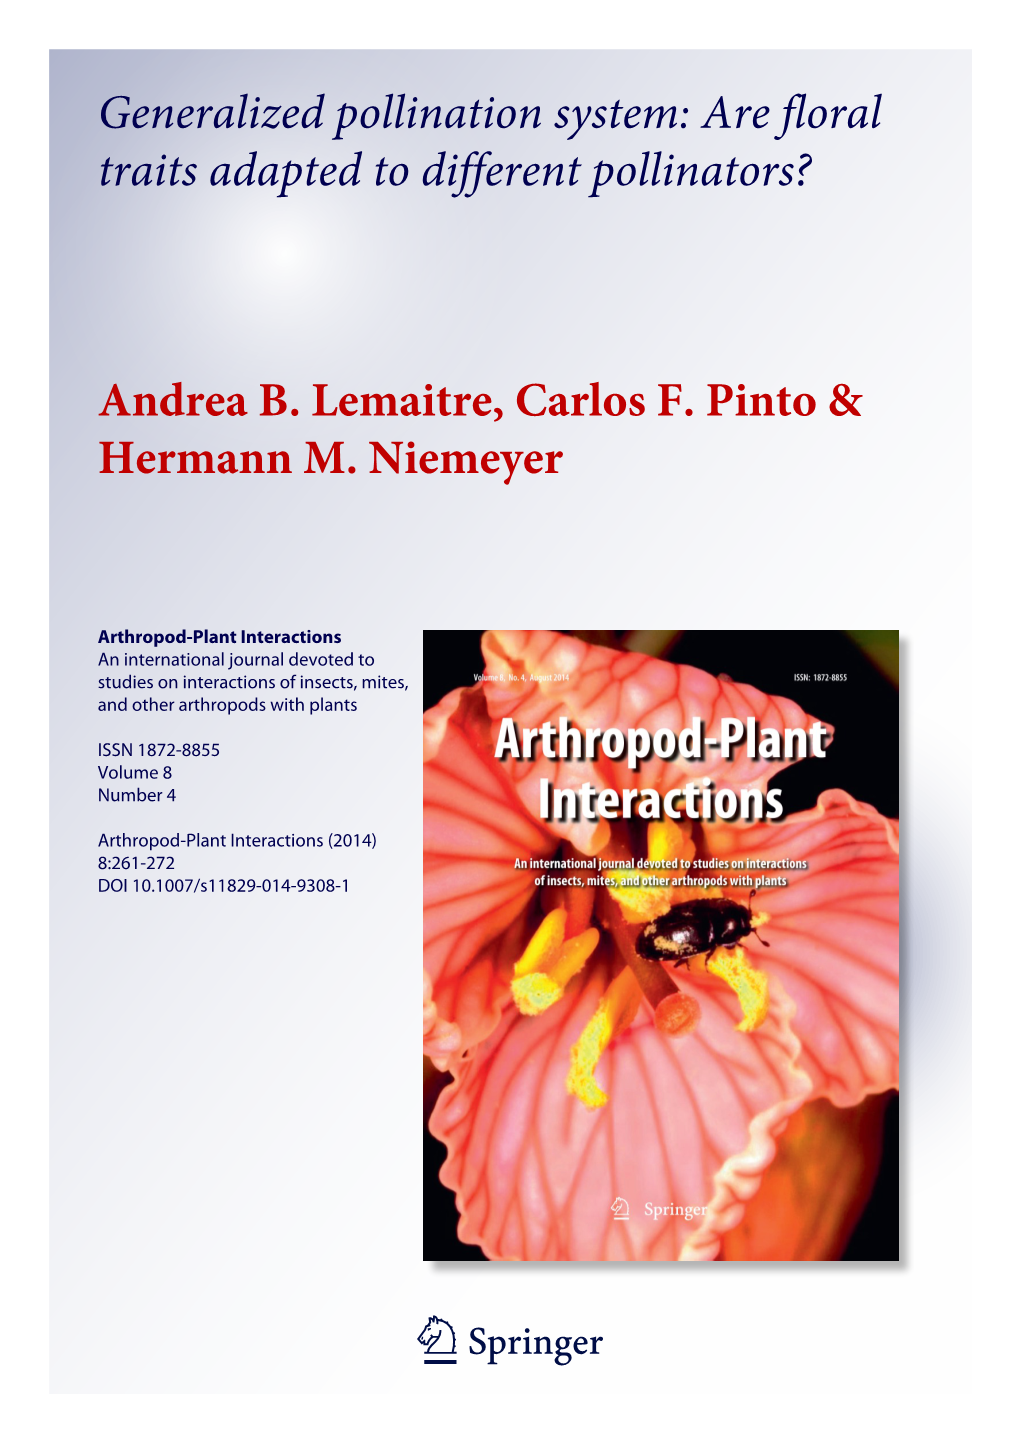 Are Floral Traits Adapted to Different Pollinators? Andrea B. Lemaitre